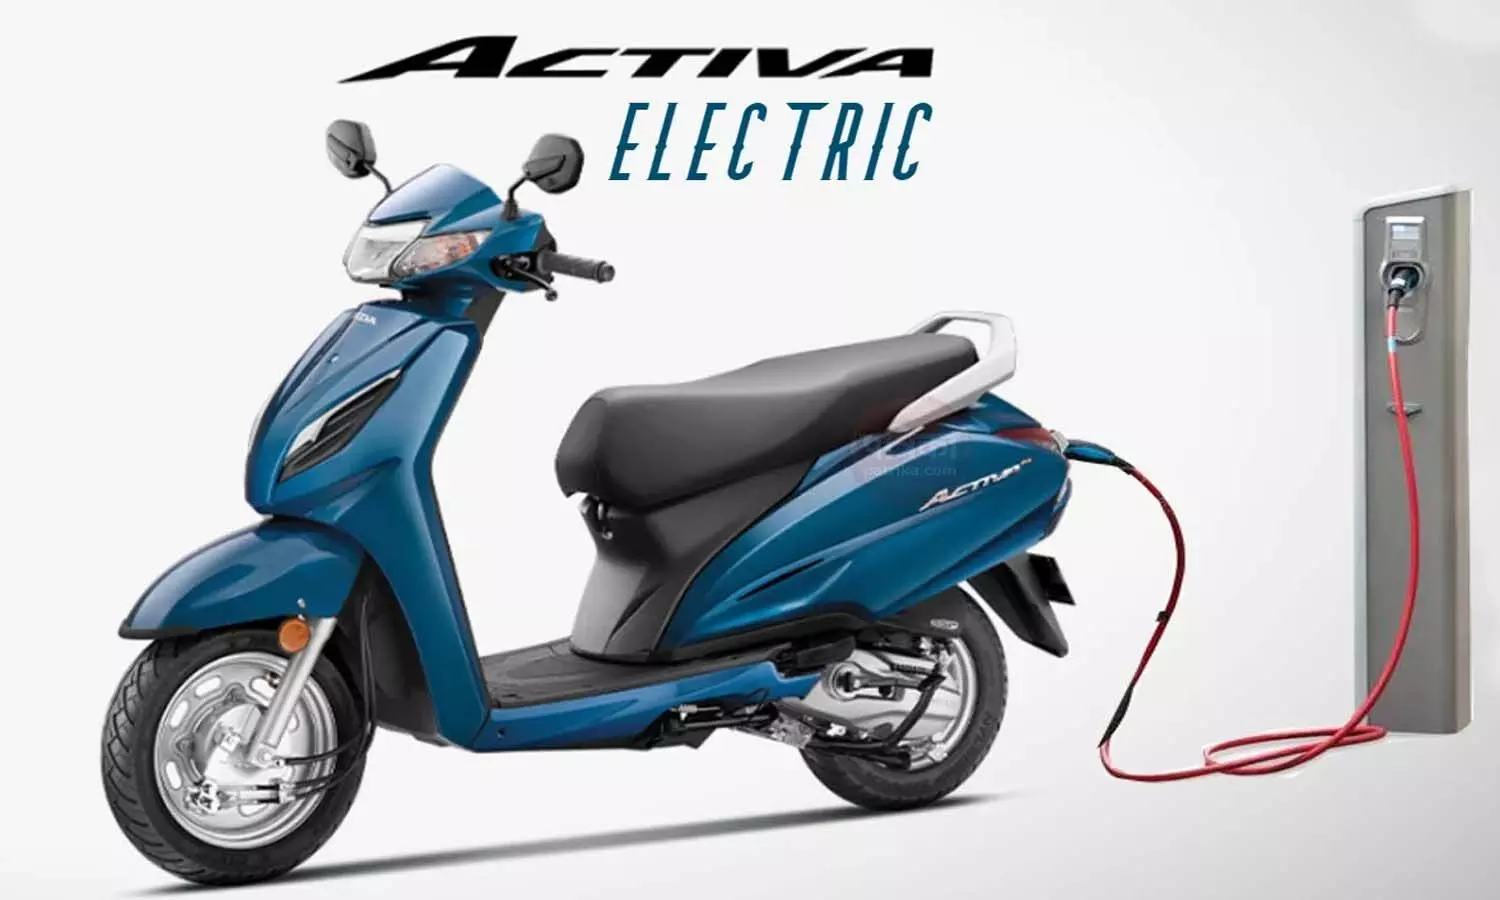 Know details before buying Honda Activa Electric